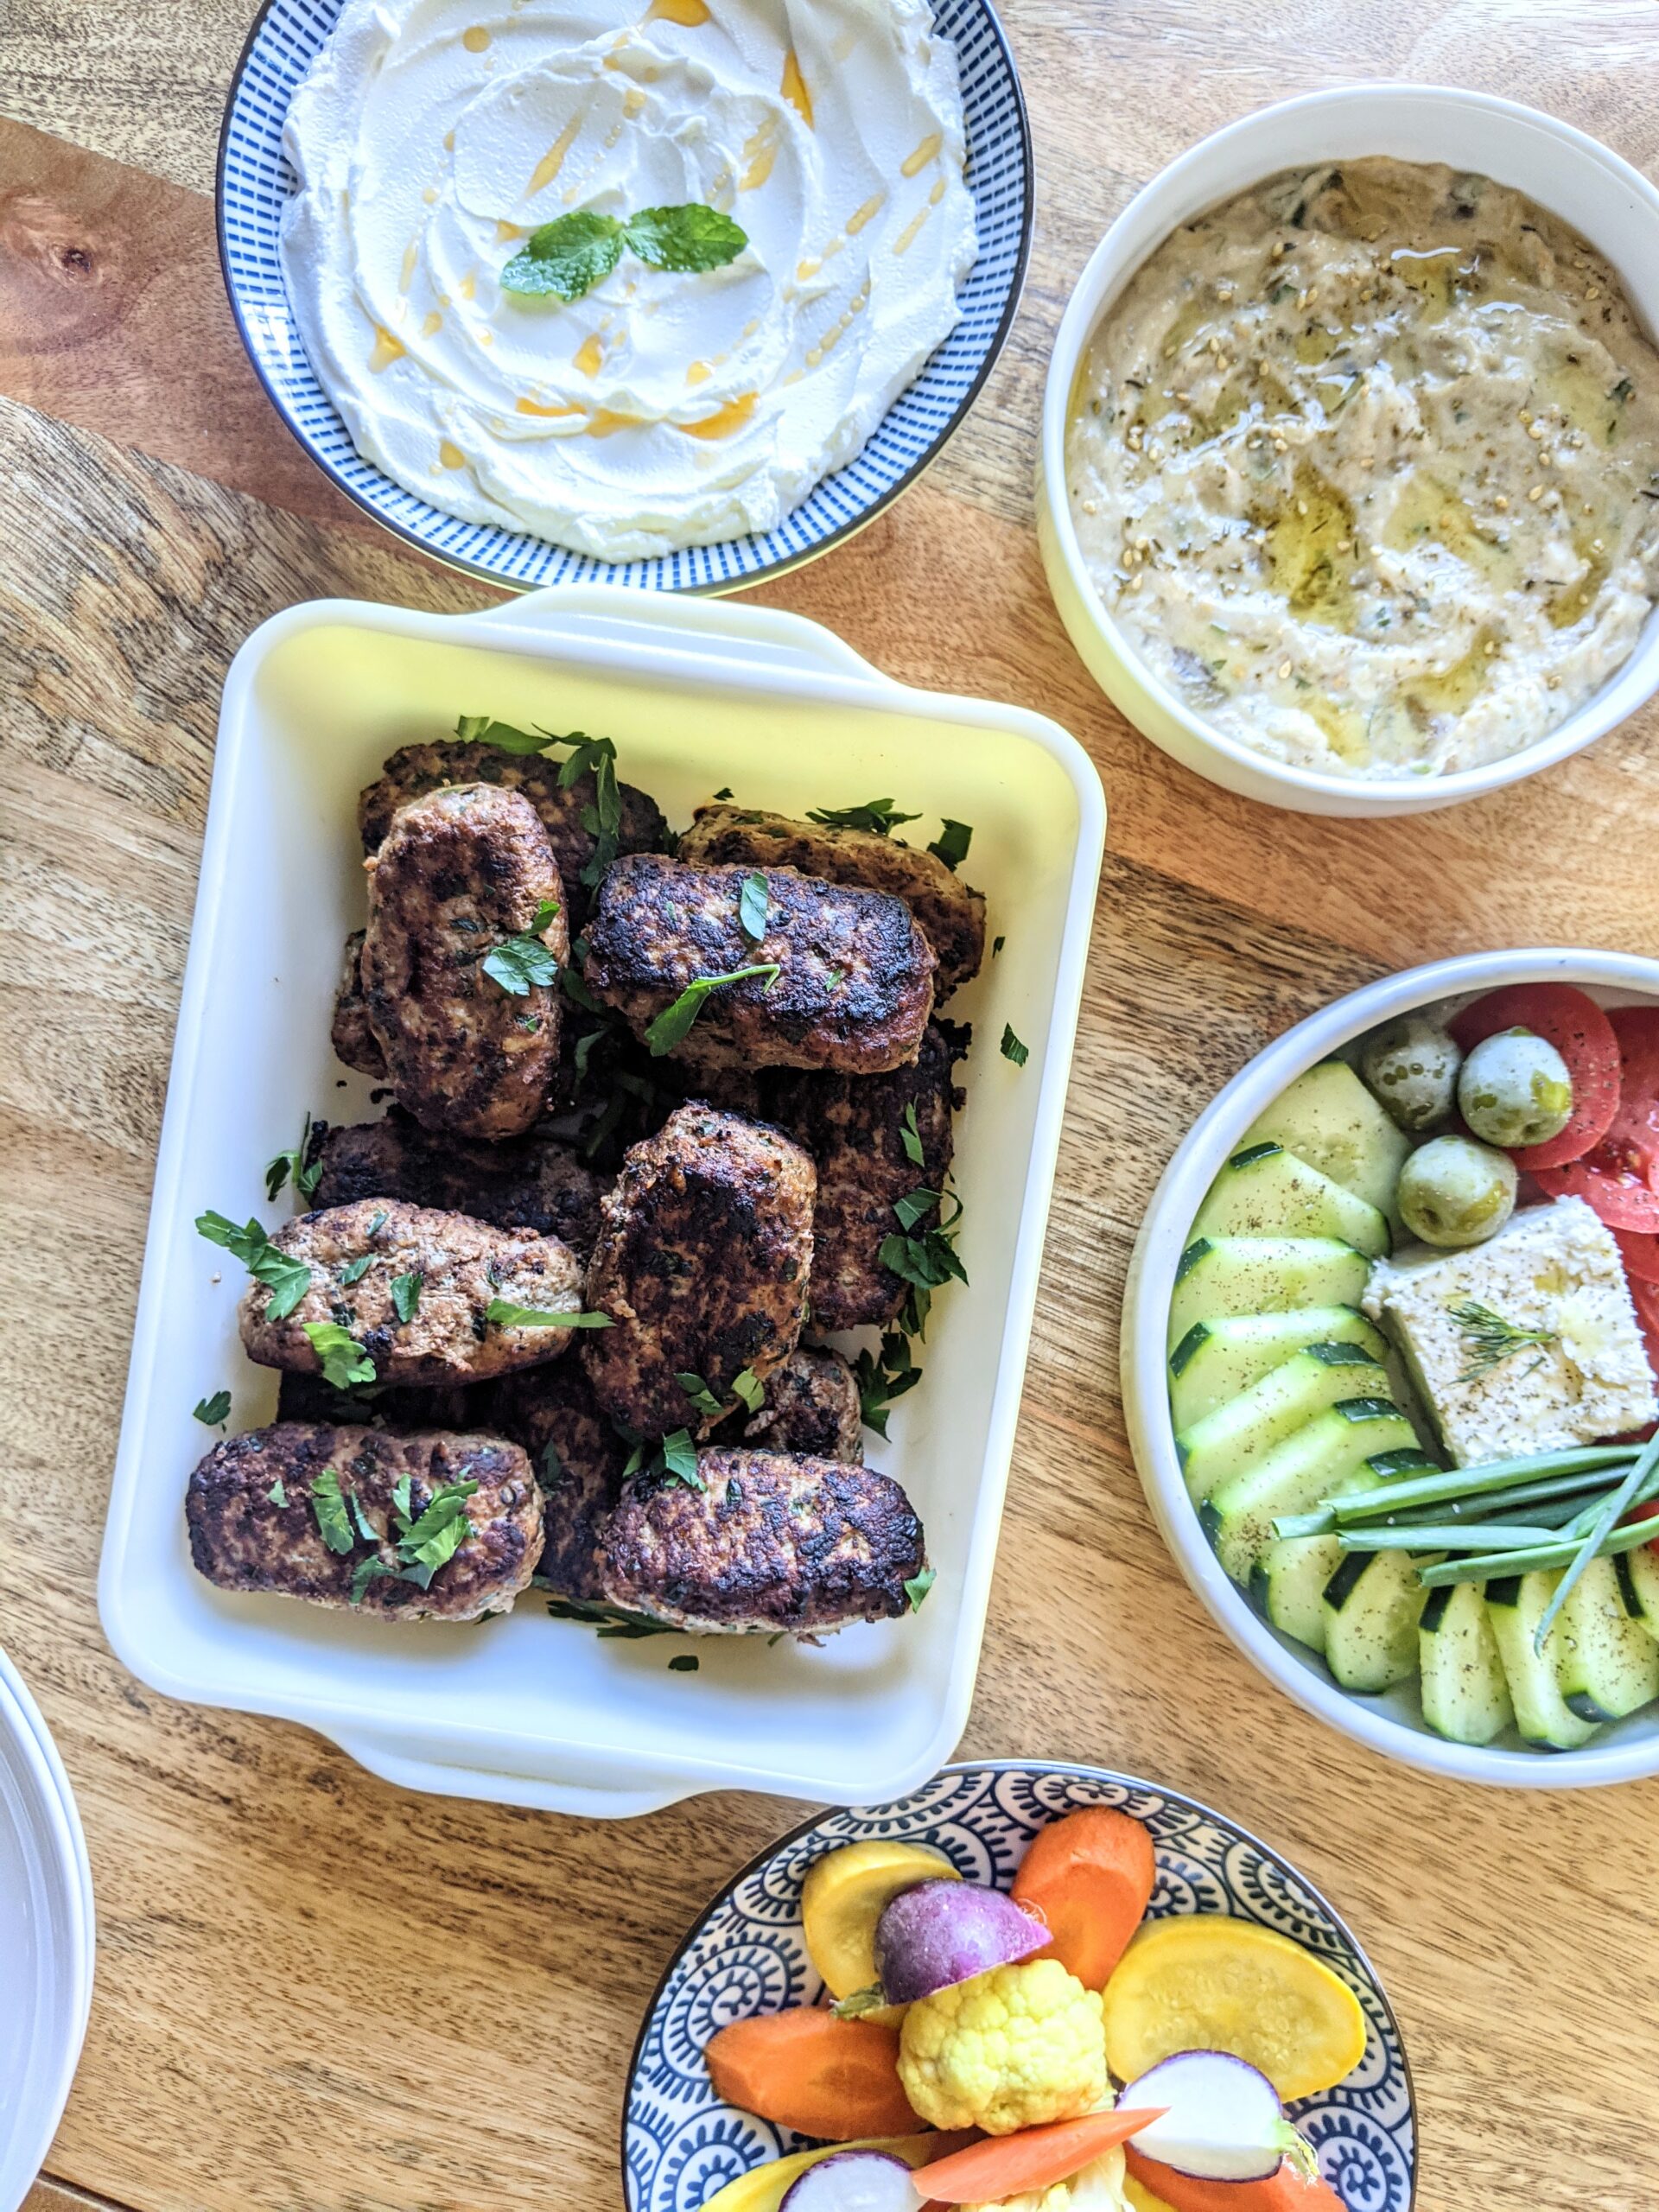 A casserole dish full of log shaped Albanian beef Qofte Meatballs. Served alongside labneh, hummus, a village salad, and pickled vegetables.